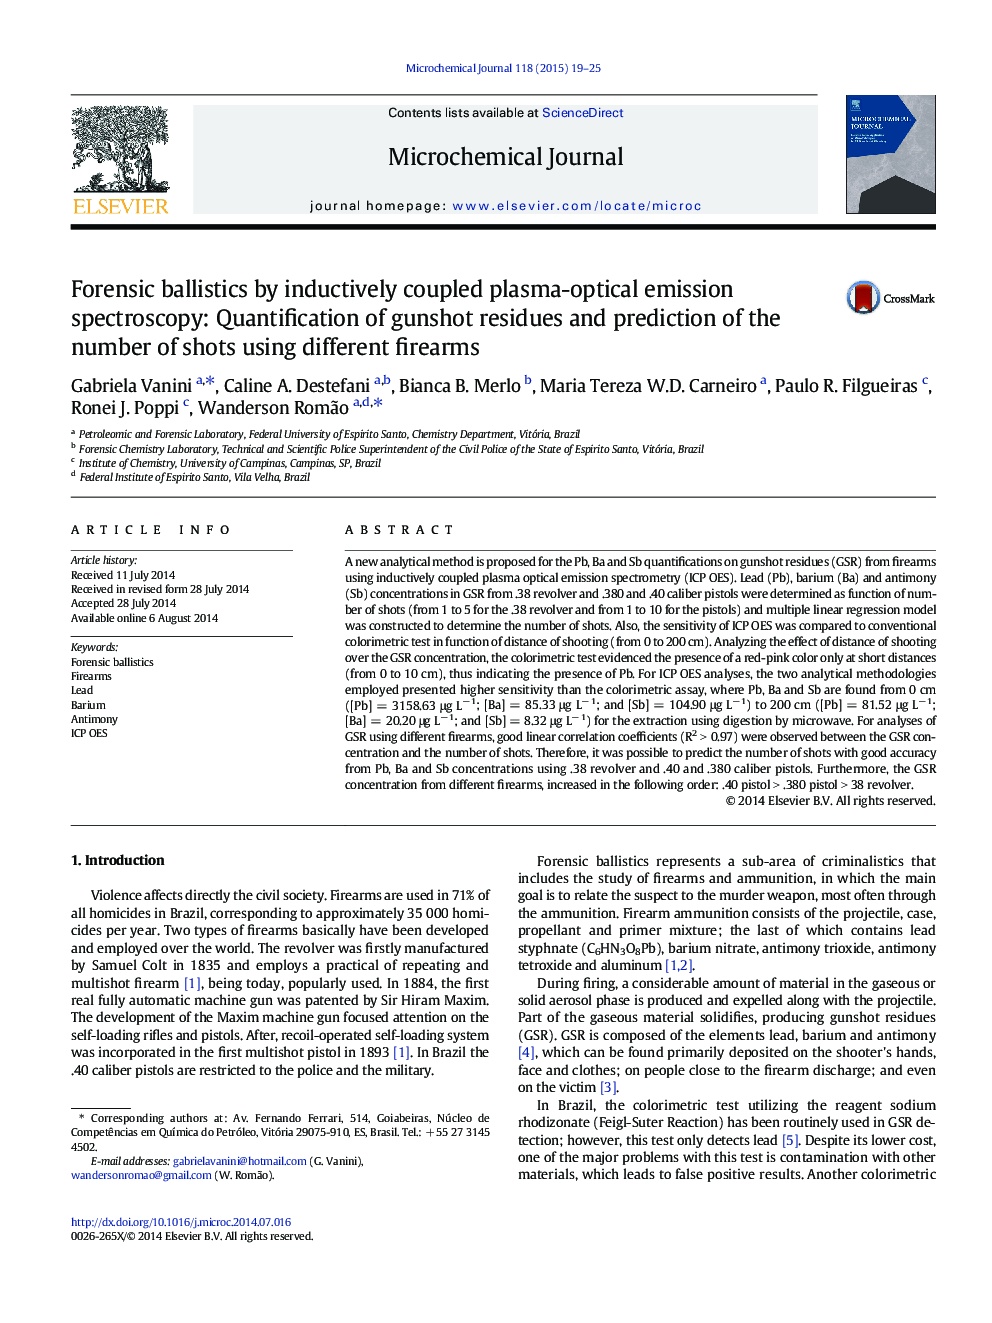 Forensic ballistics by inductively coupled plasma-optical emission spectroscopy: Quantification of gunshot residues and prediction of the number of shots using different firearms